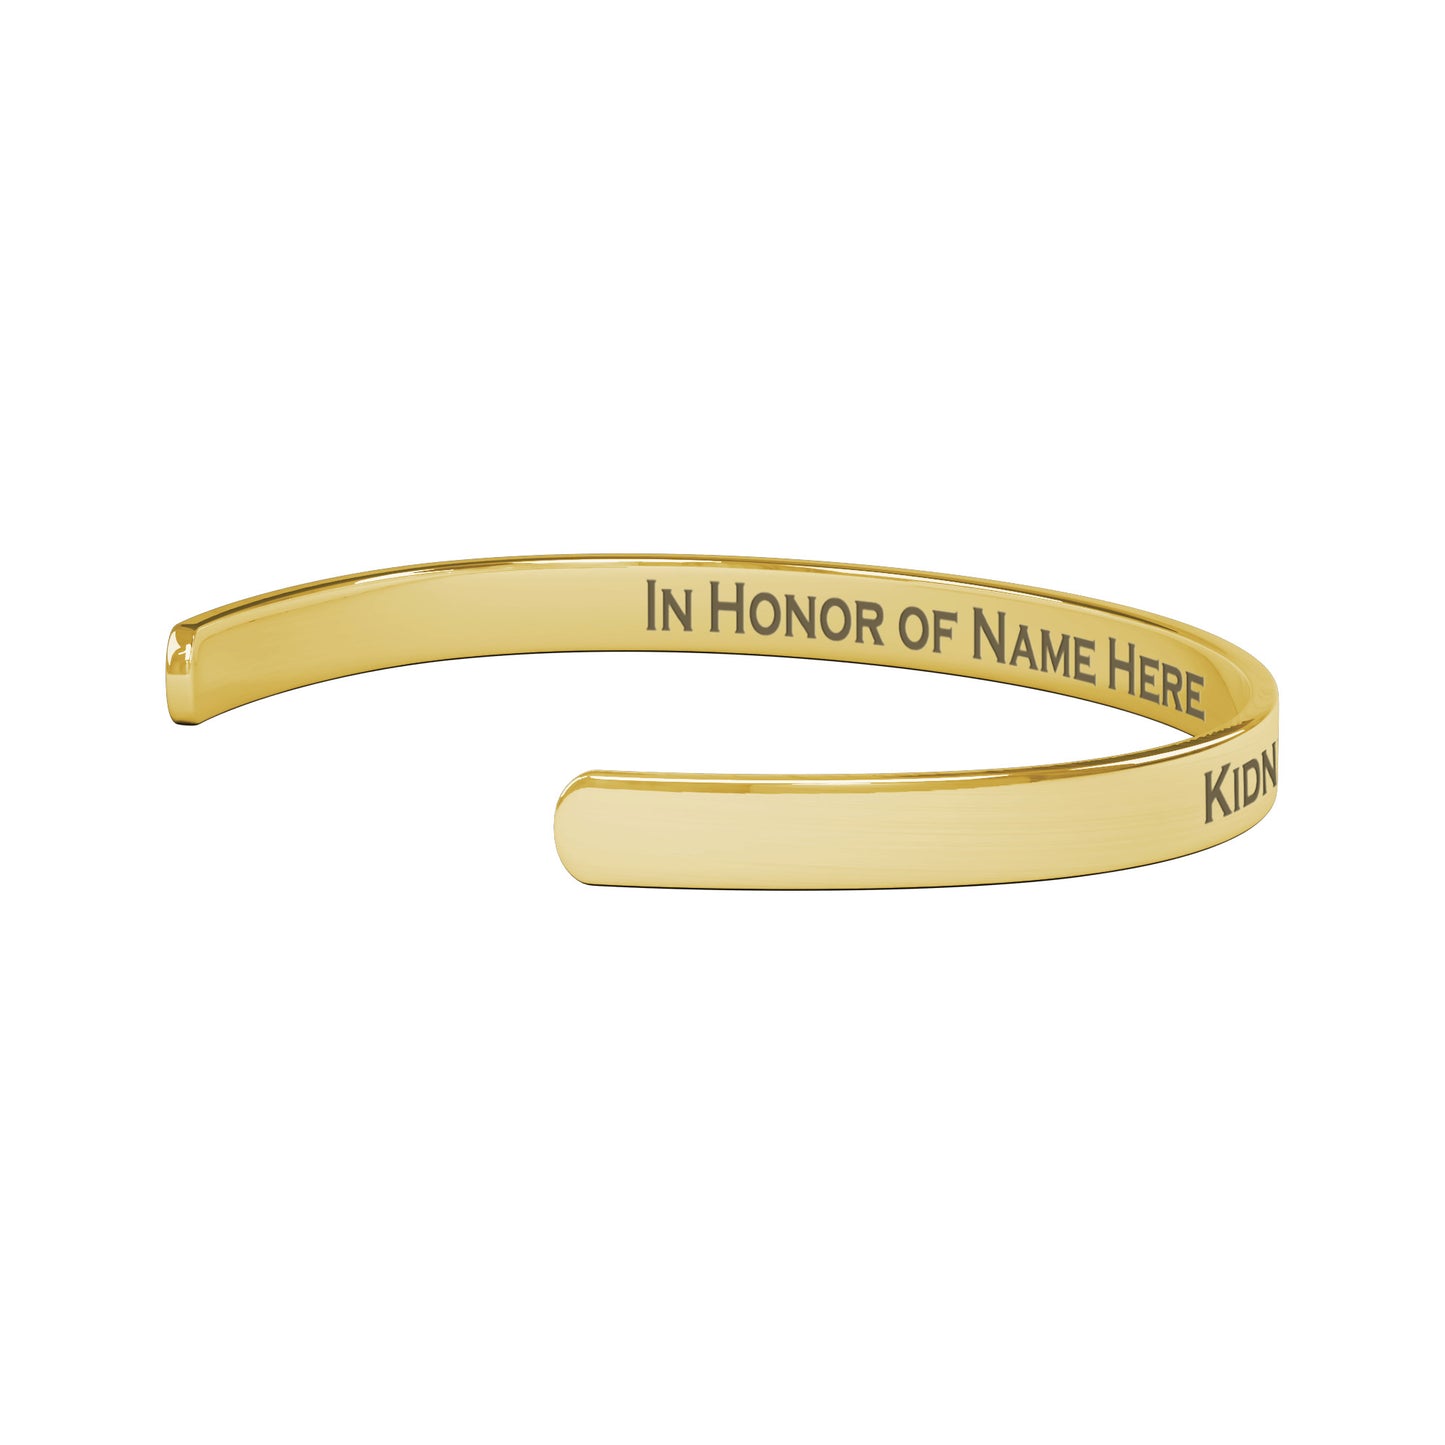 Personalized Kidney Cancer Awareness Cuff Bracelet